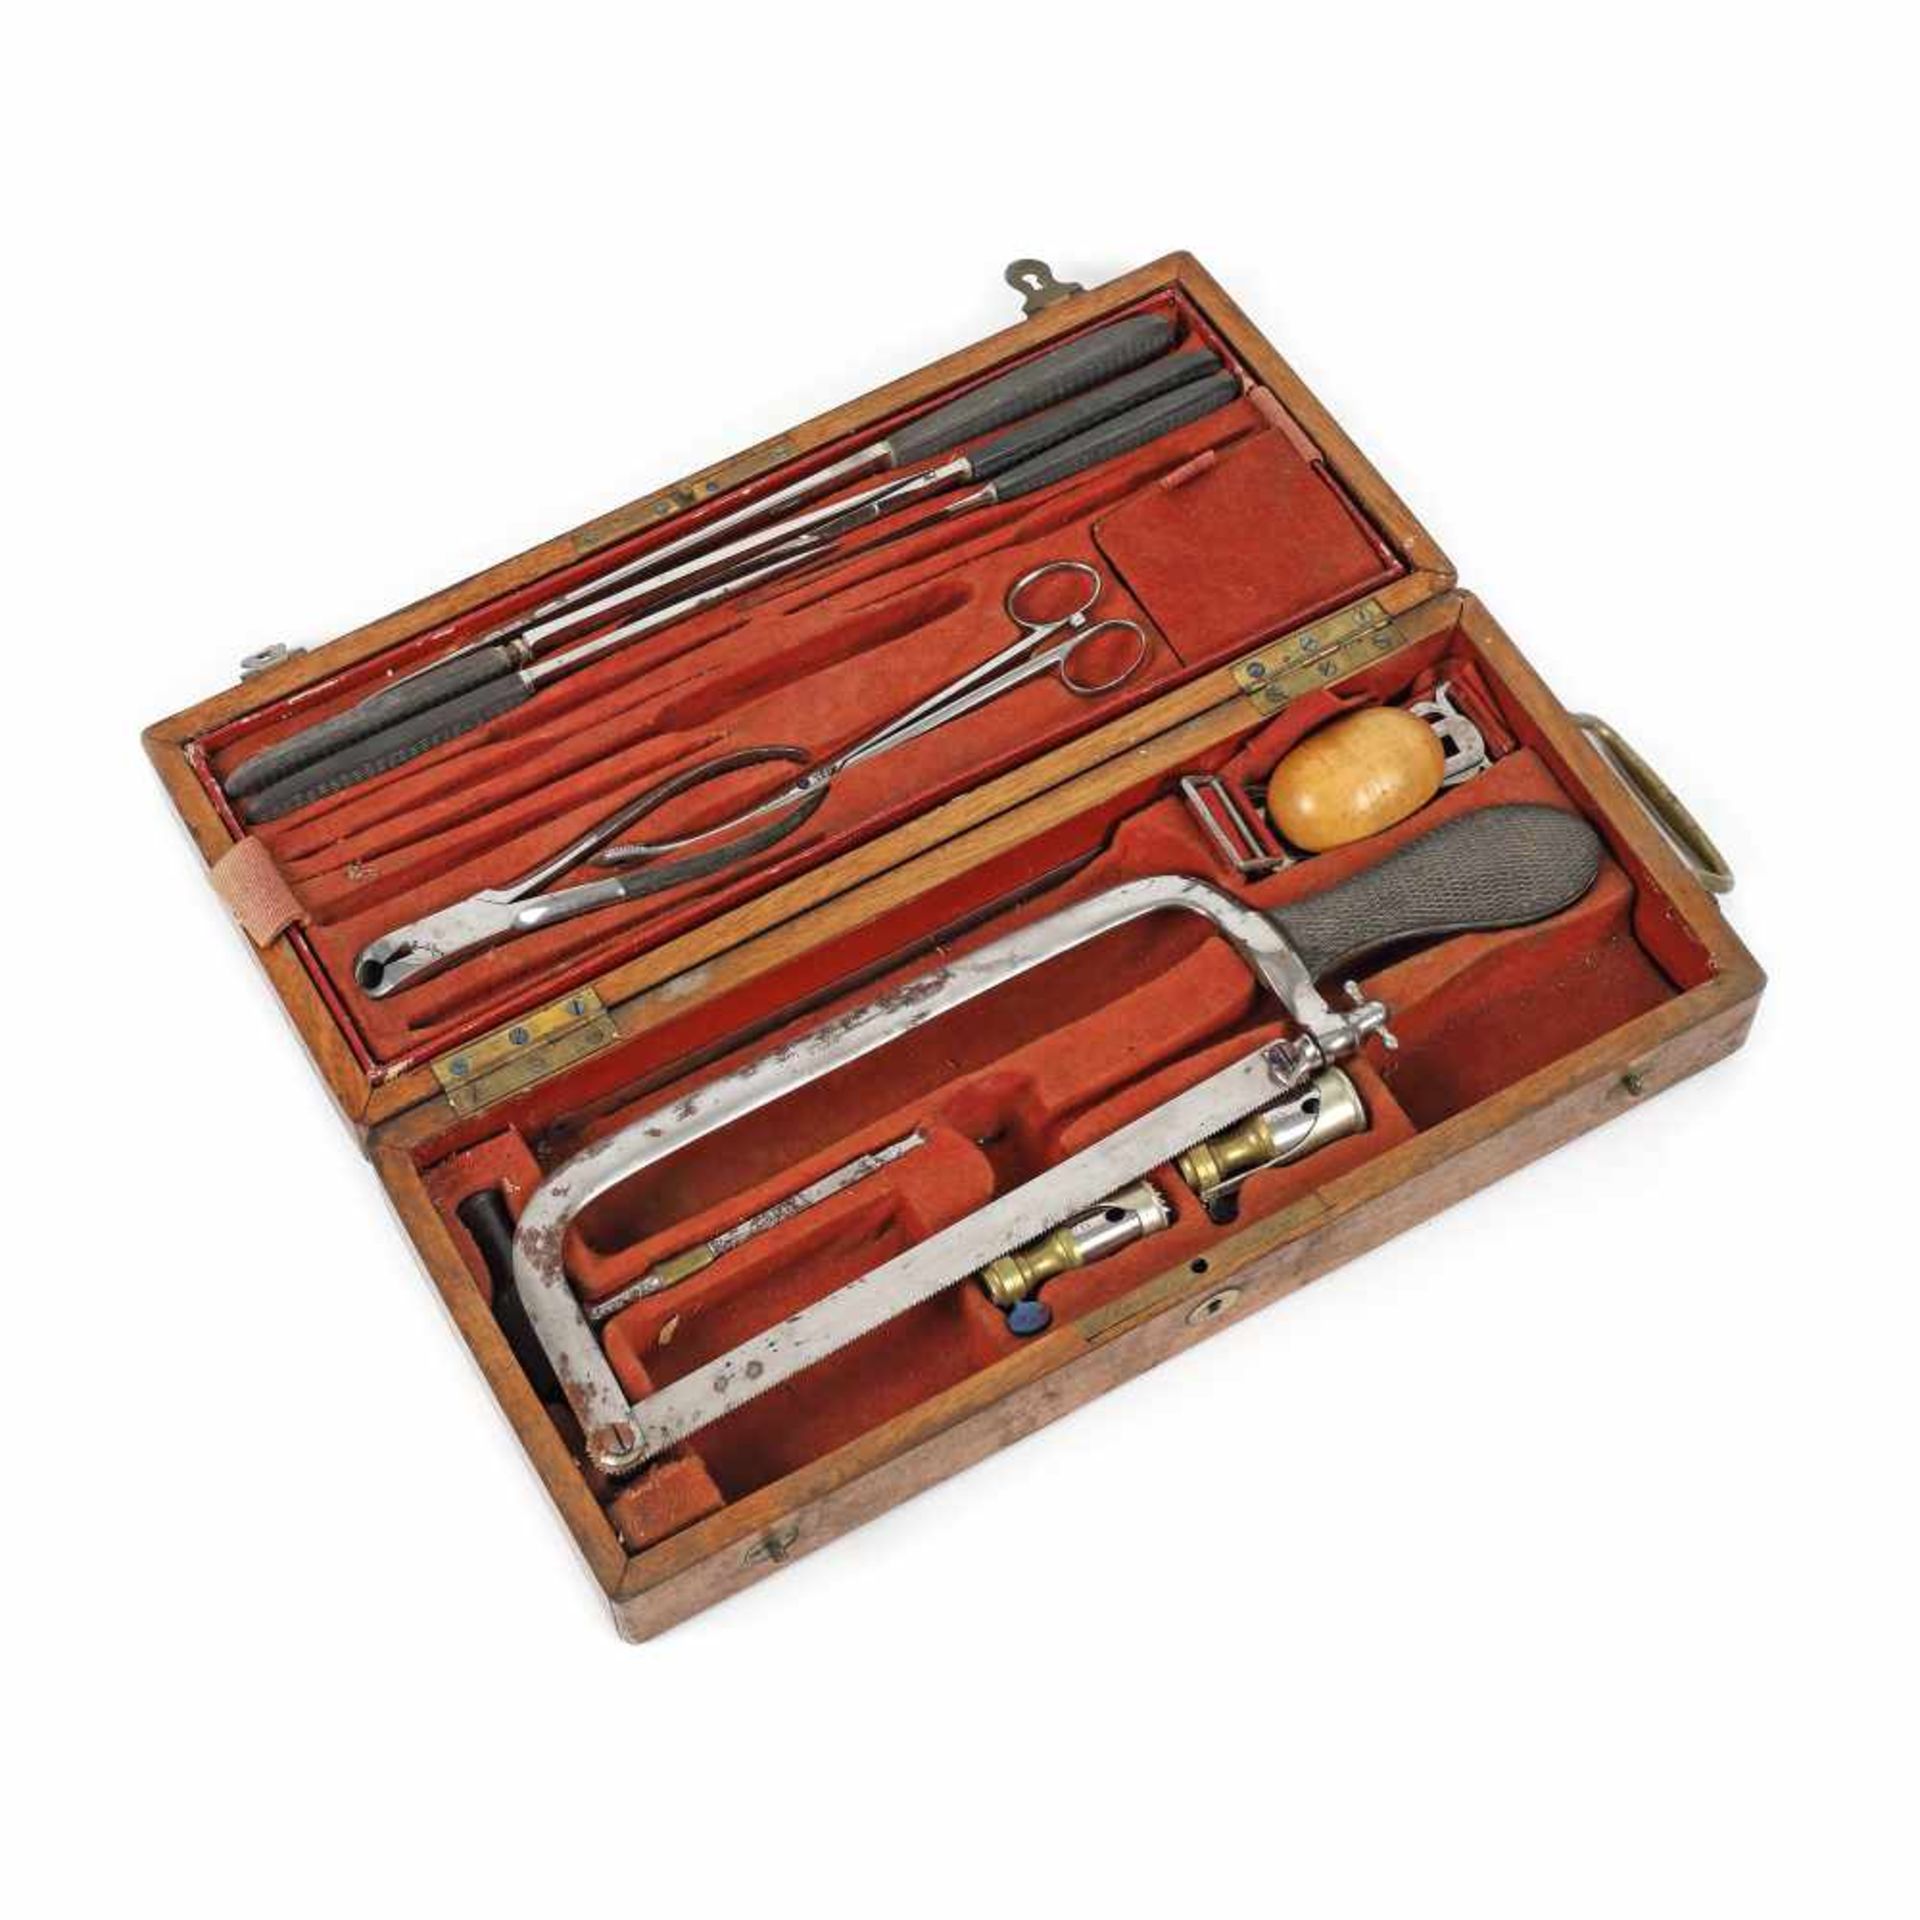 Portable surgery kit, "Charrière" brand, Paris, 19th century, which Dr. Raul Dona used in the First